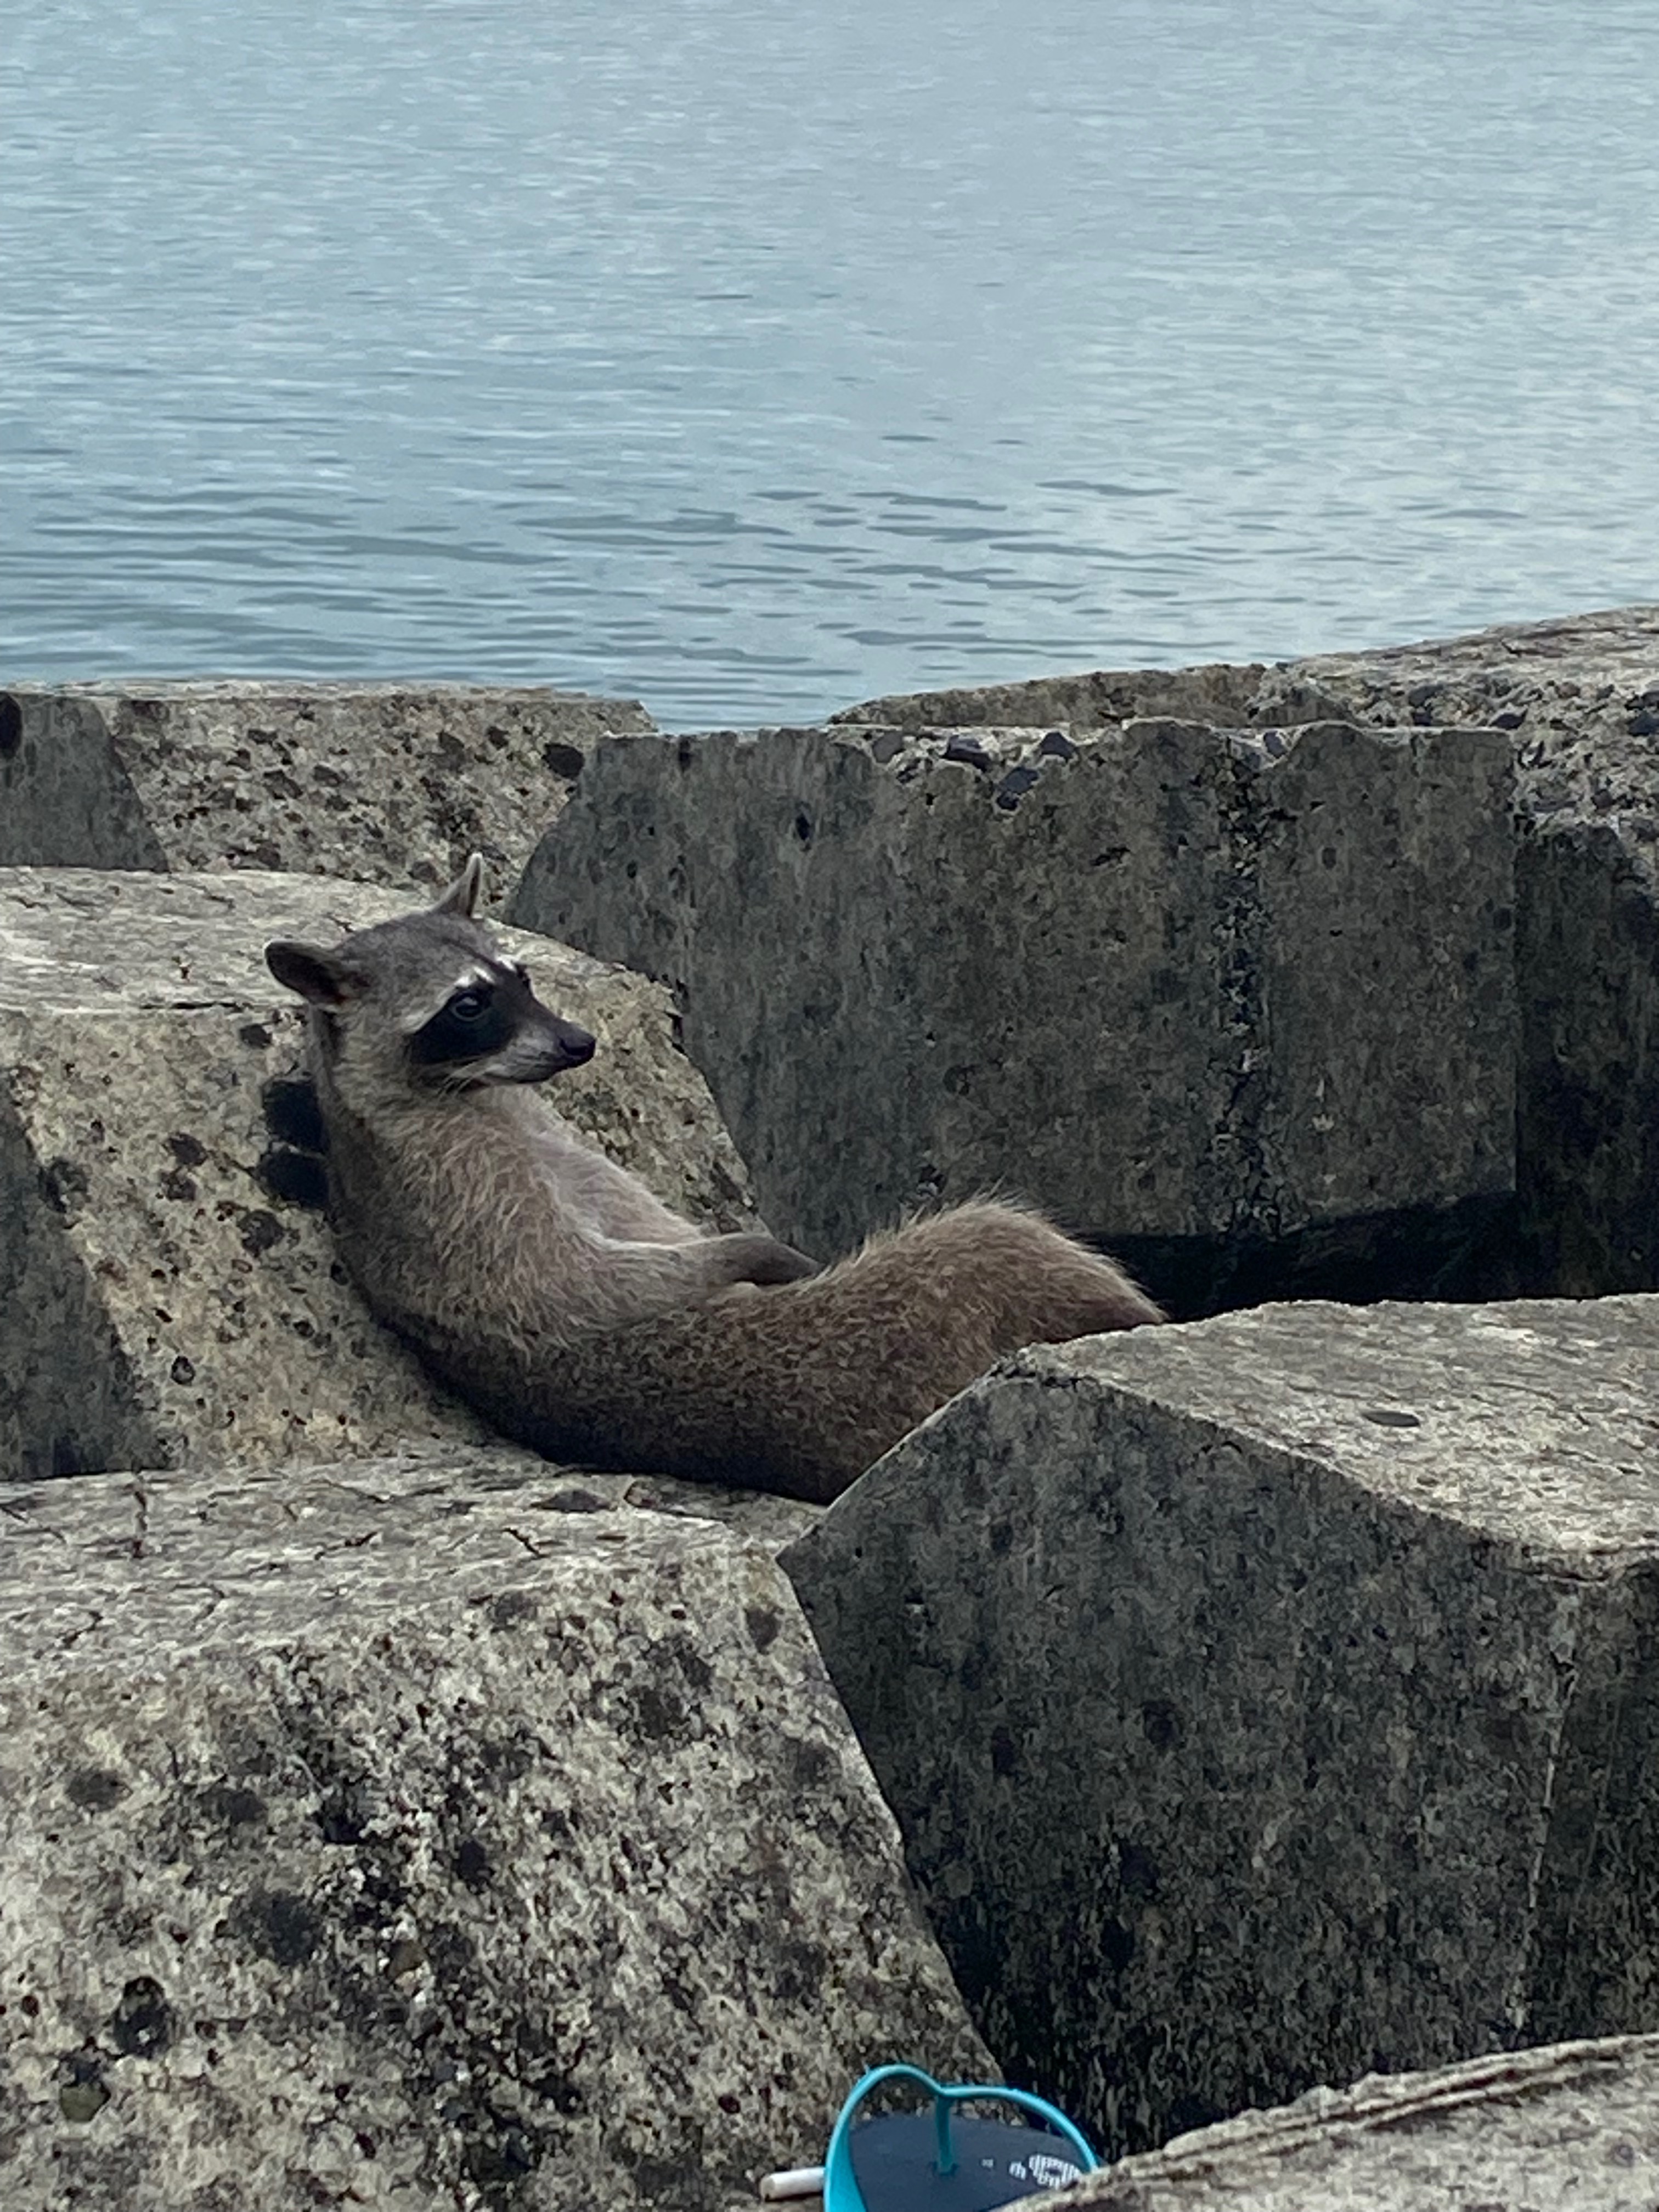 A Panamanian raccoon lounging among some rocks at a lake, as if they are slacking off from work without a worry in the world.